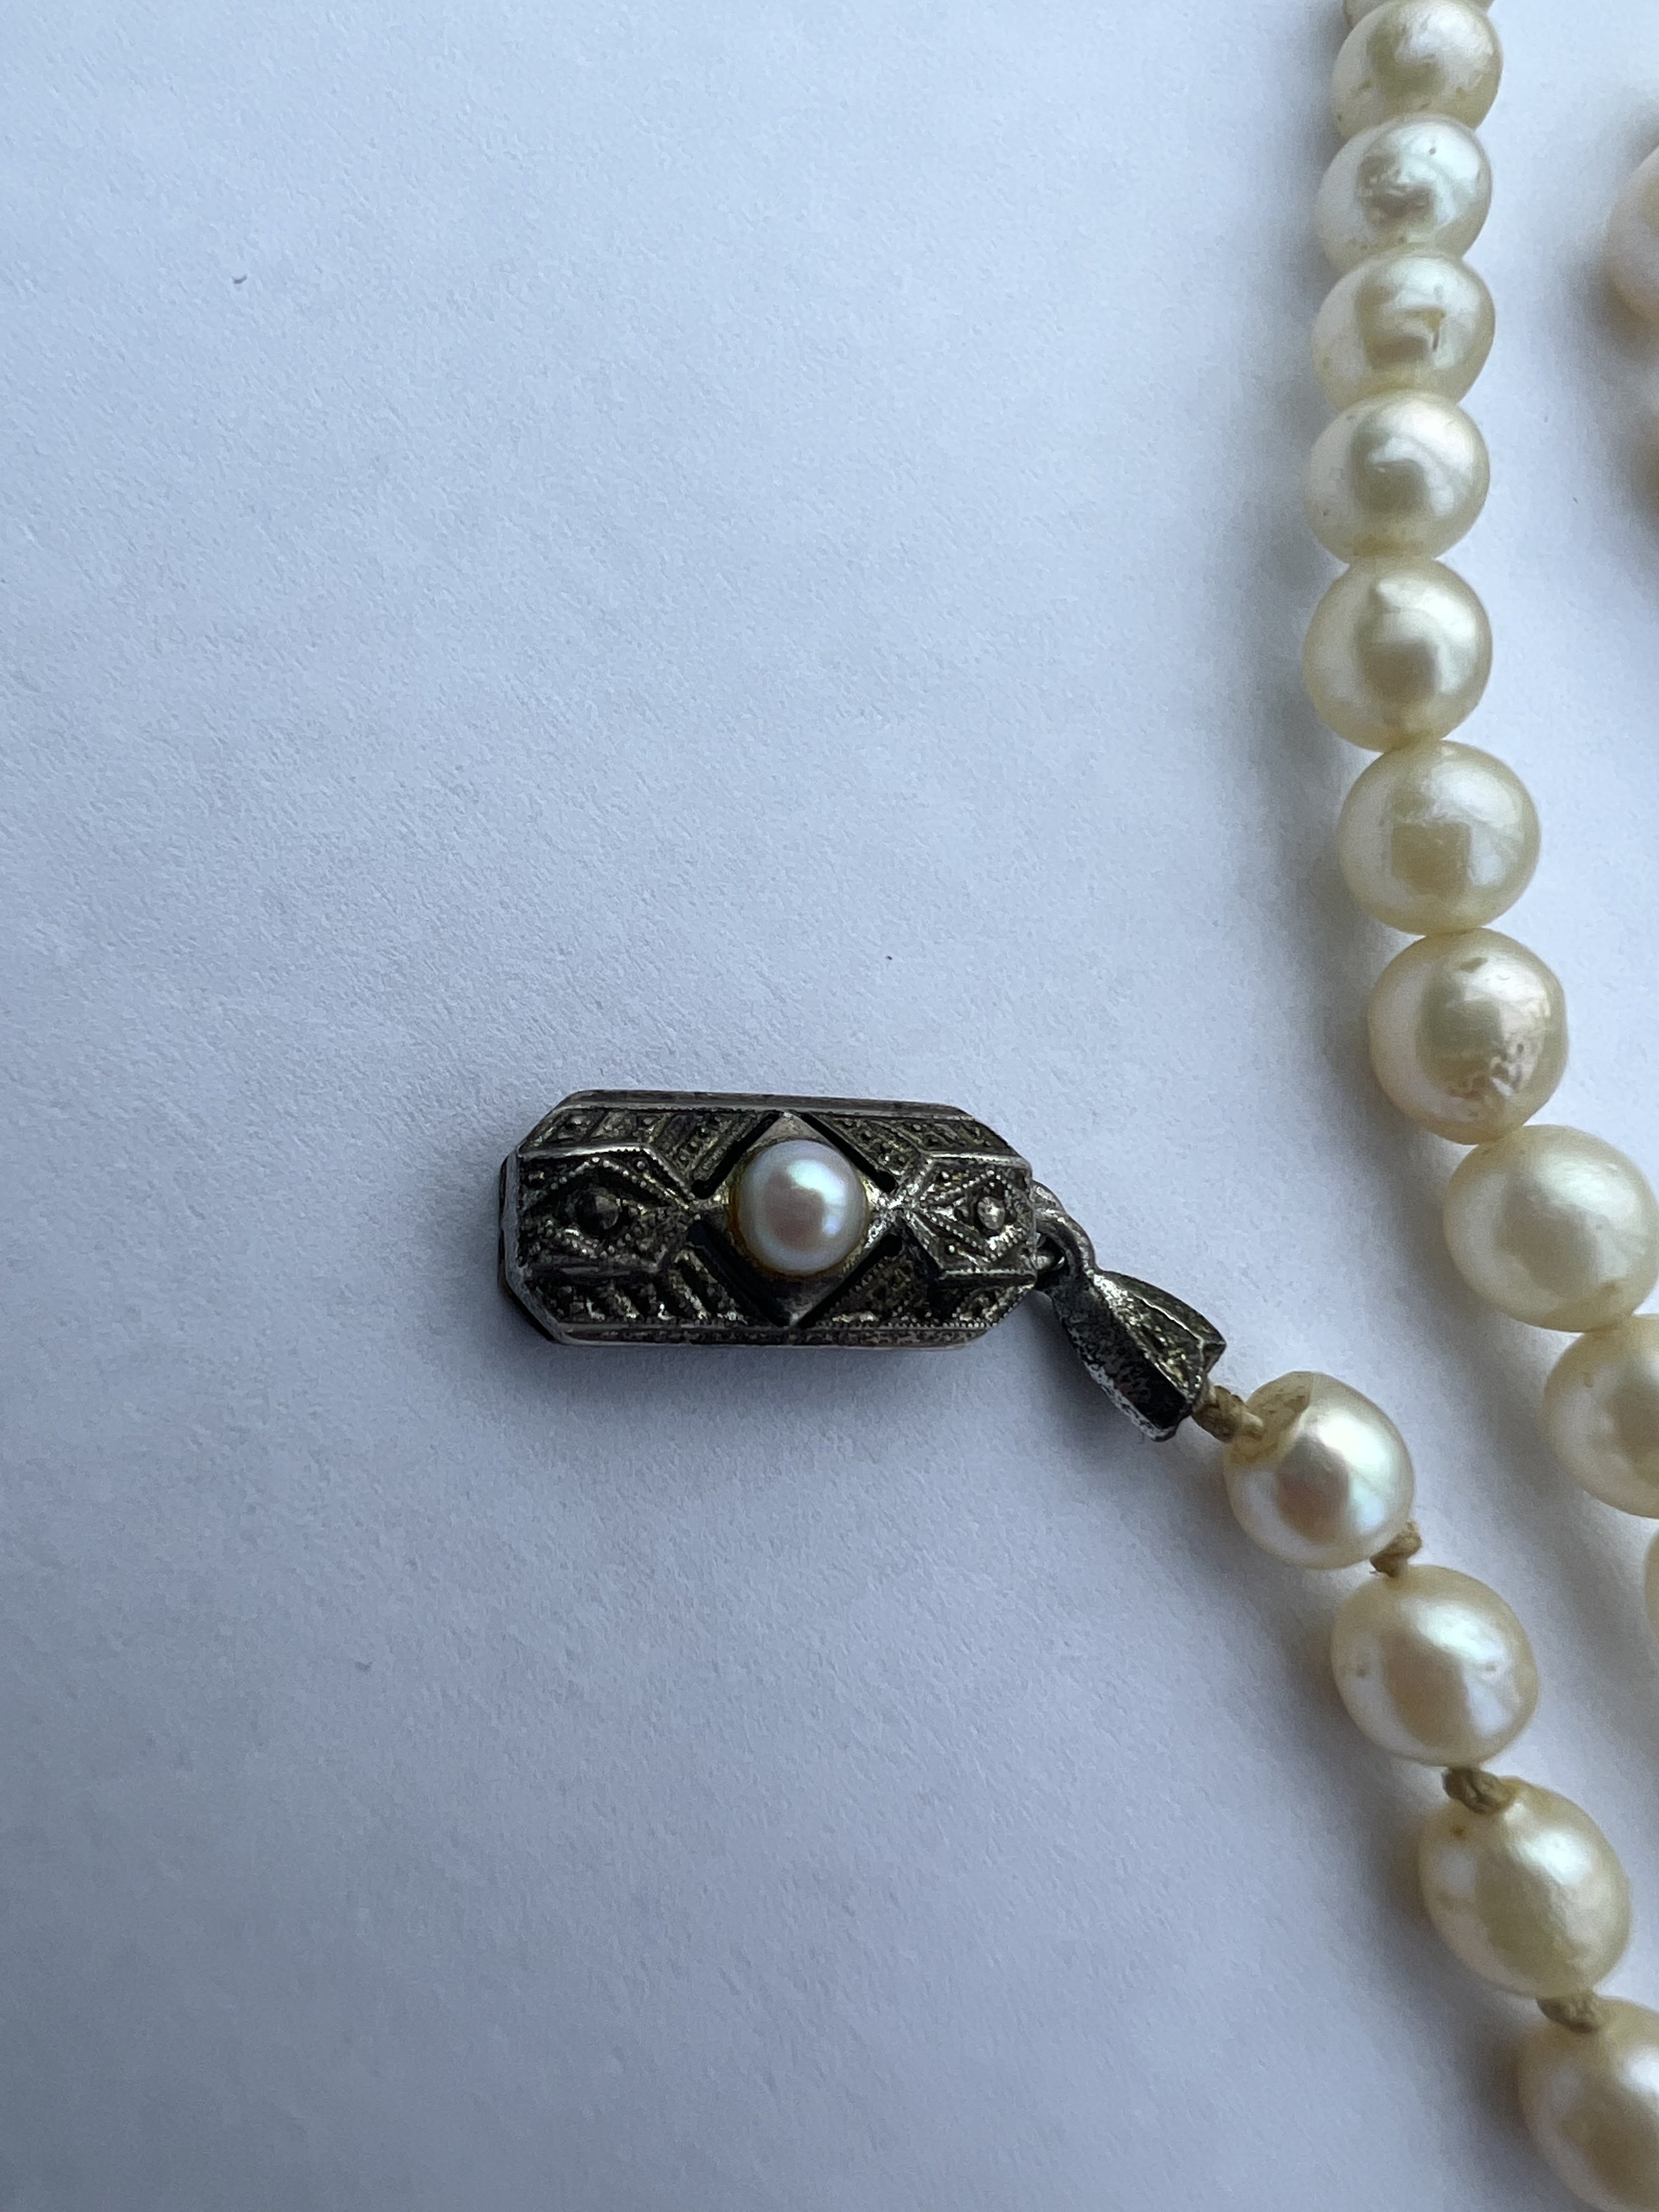 Vintage clasp on an old pearl strand